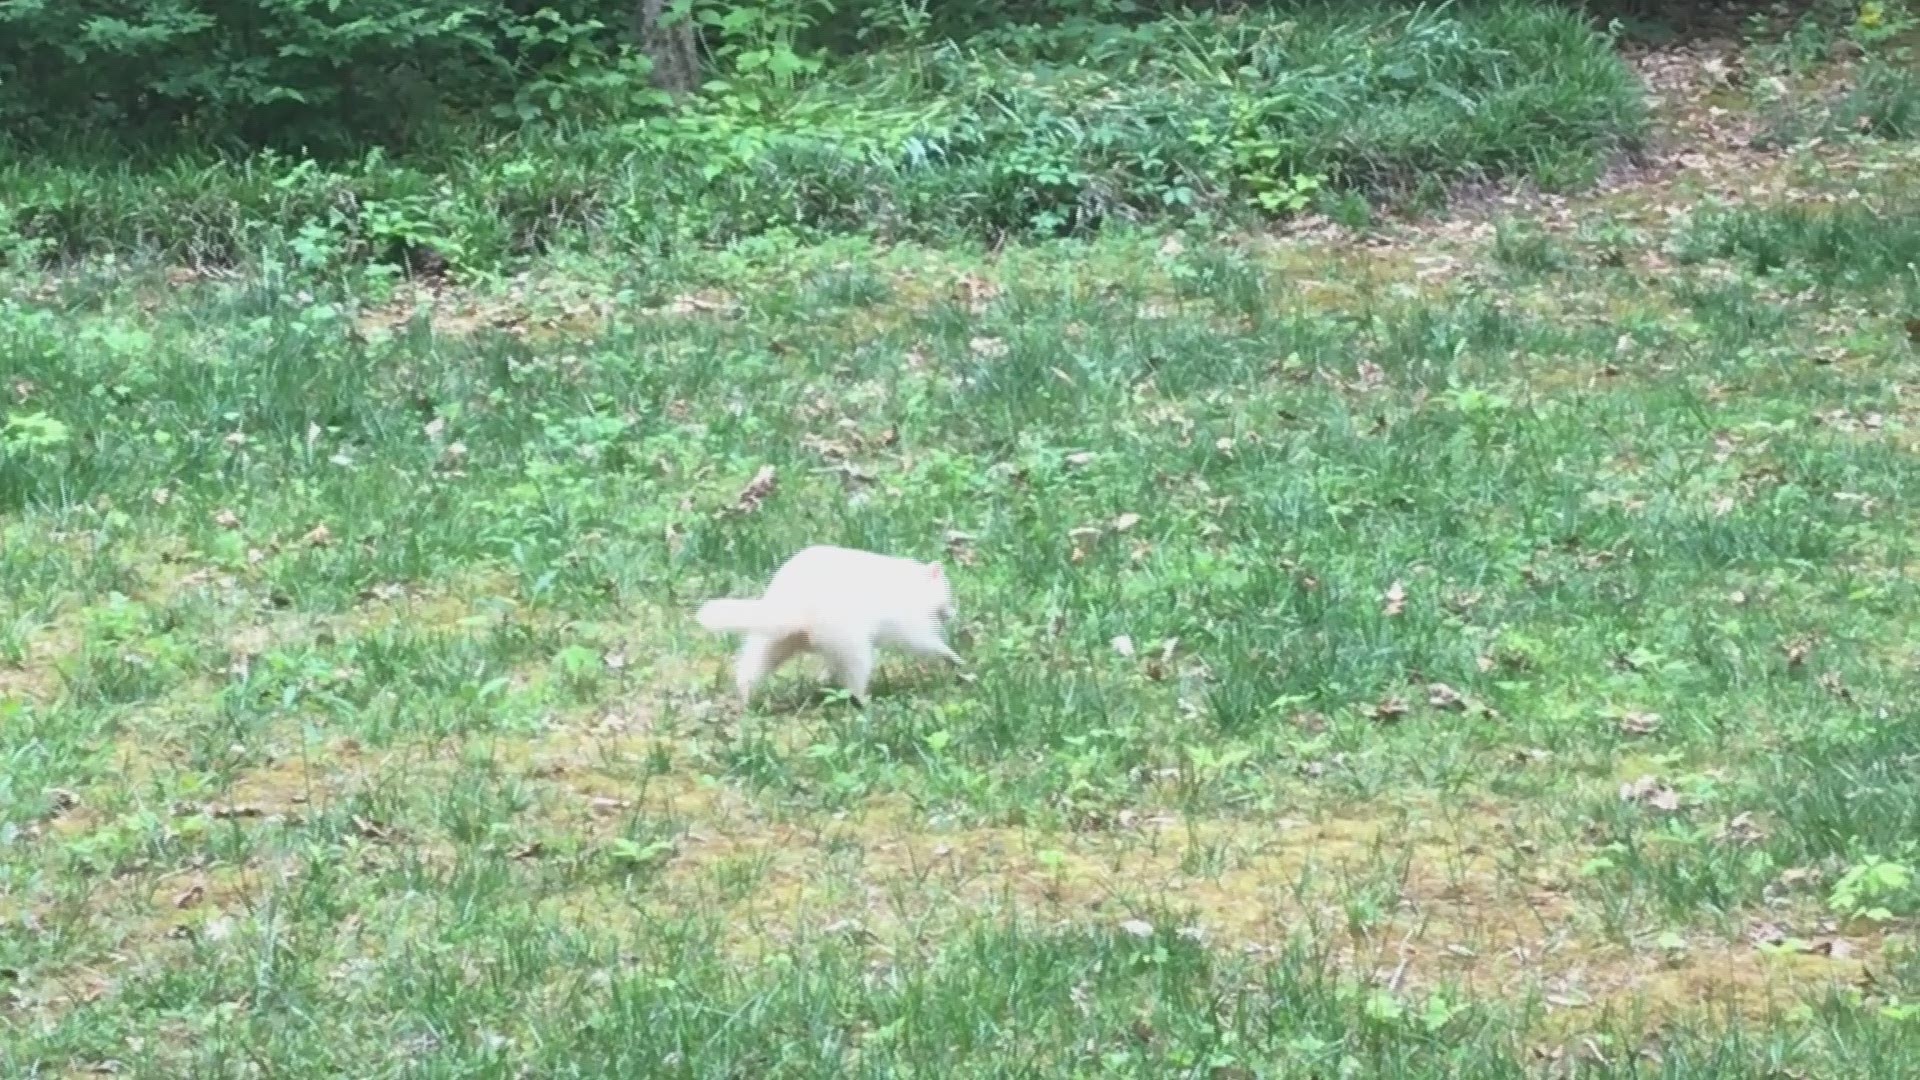 A rare albino raccoon trotted through a woman's yard about a mile off of Kingston Pike near Pellissippi Parkway in West Knoxville this week.